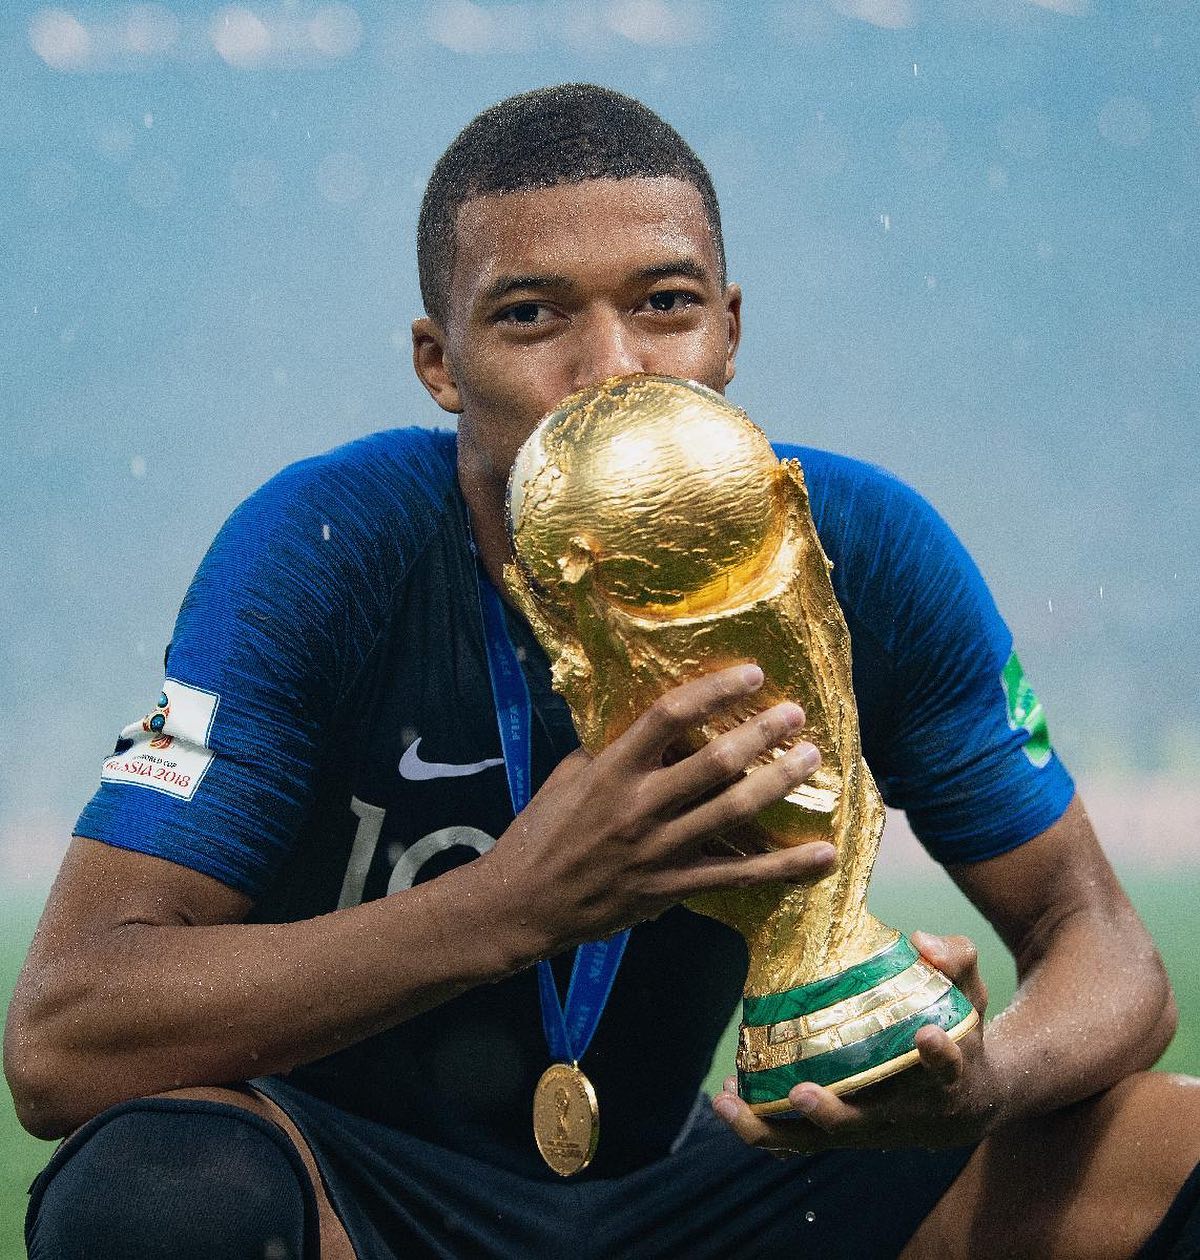 Kylian Mbappé Bio, Age, Height, Weight, Net Worth, Girlfriend, Wife, Family, Body Stats, Cars Favorites